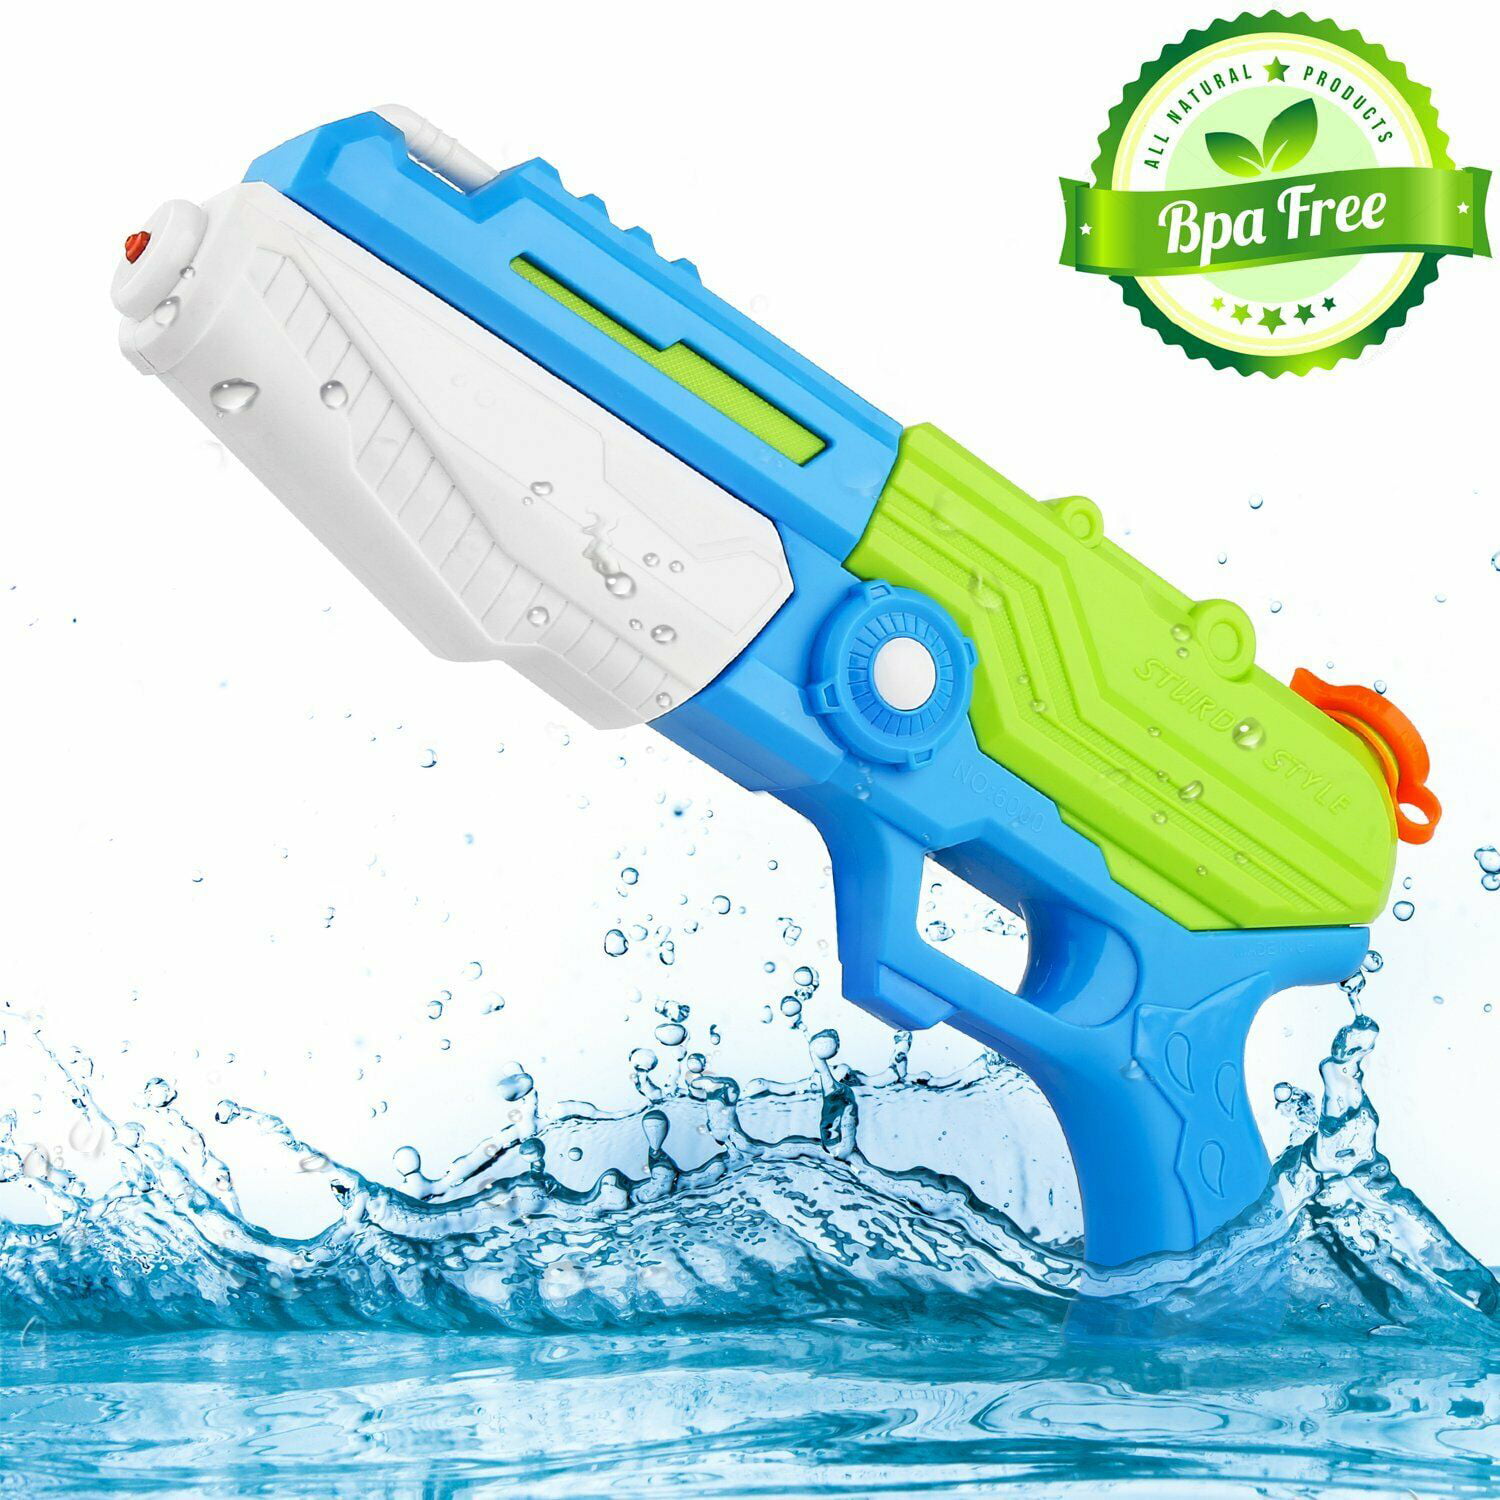 Details about   Foam Water Guns For Kids Pull Type Super Soaker Pistol Toys Summer Fun Outdoor S 